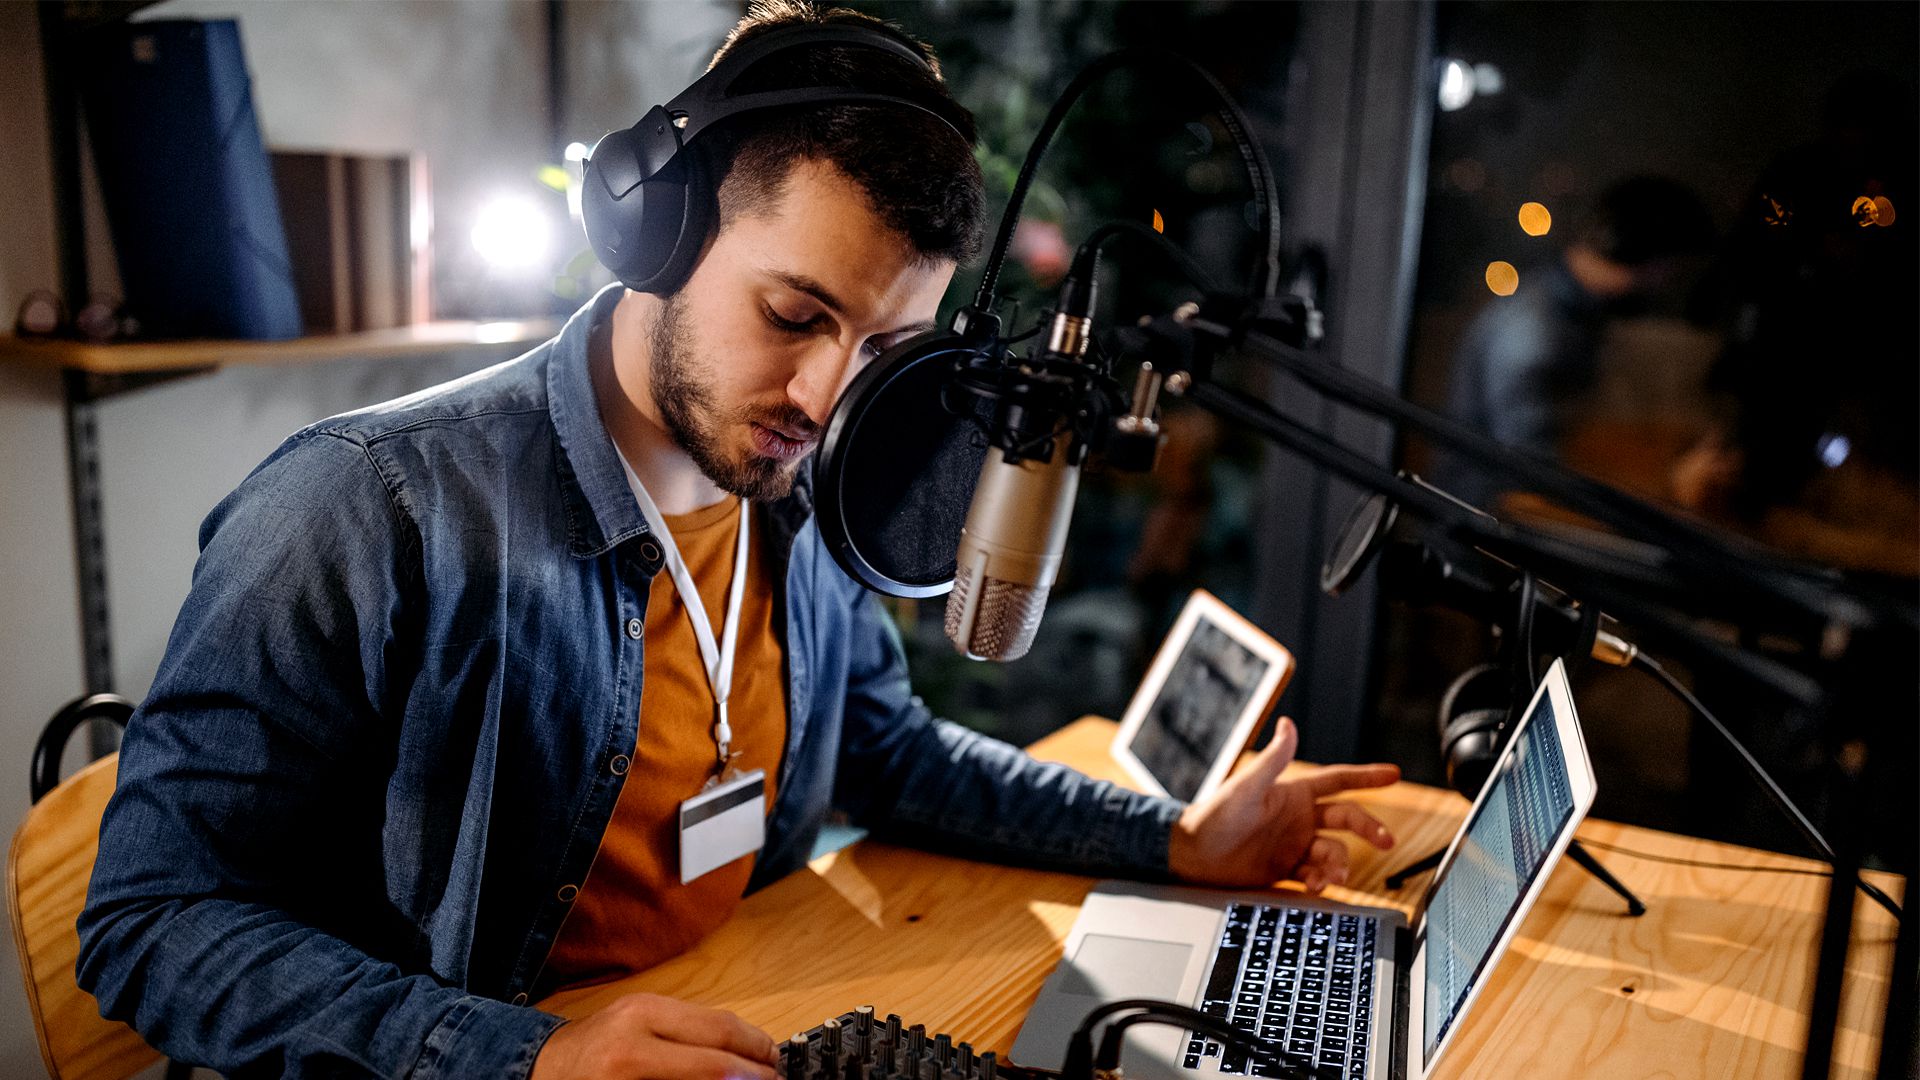 how to upload a podcast to spotify featured c9d043ed37d04b0dac14c907747f6b54